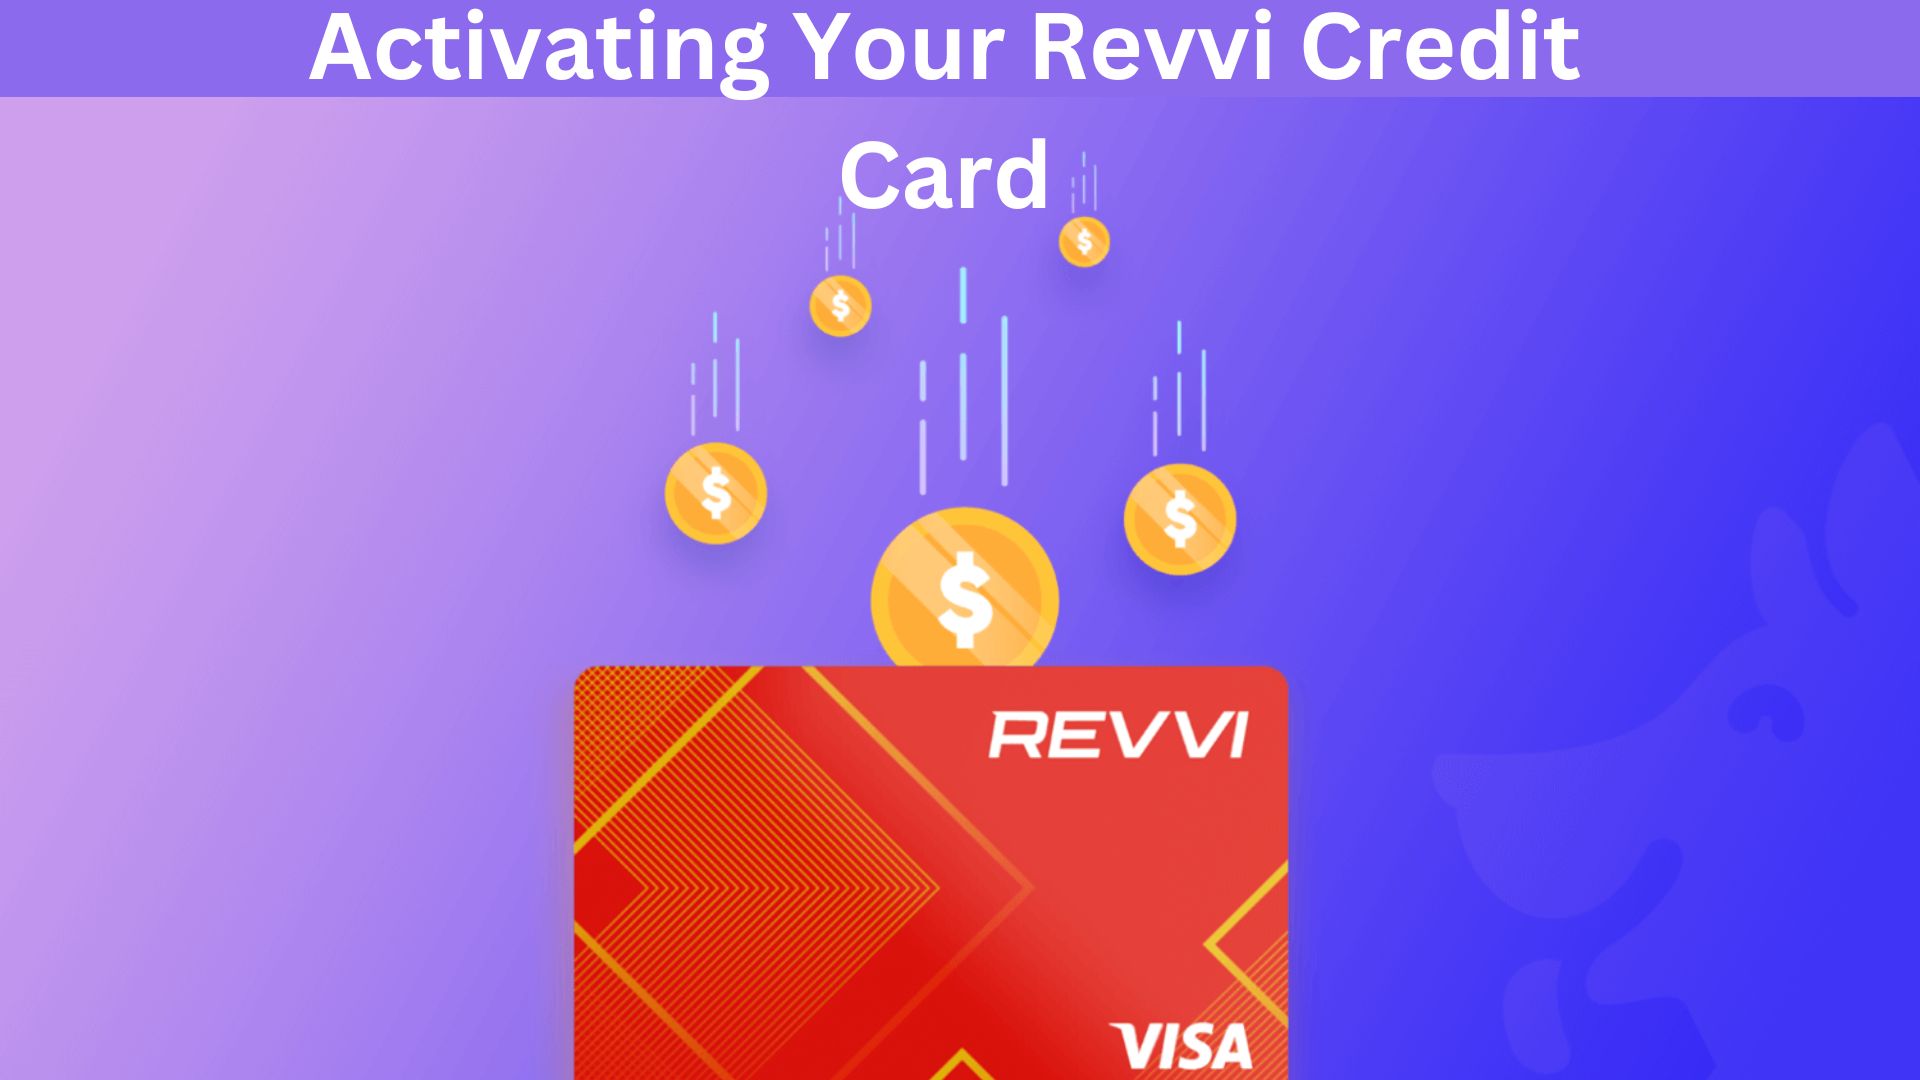 Activating Your Revvi Credit Card